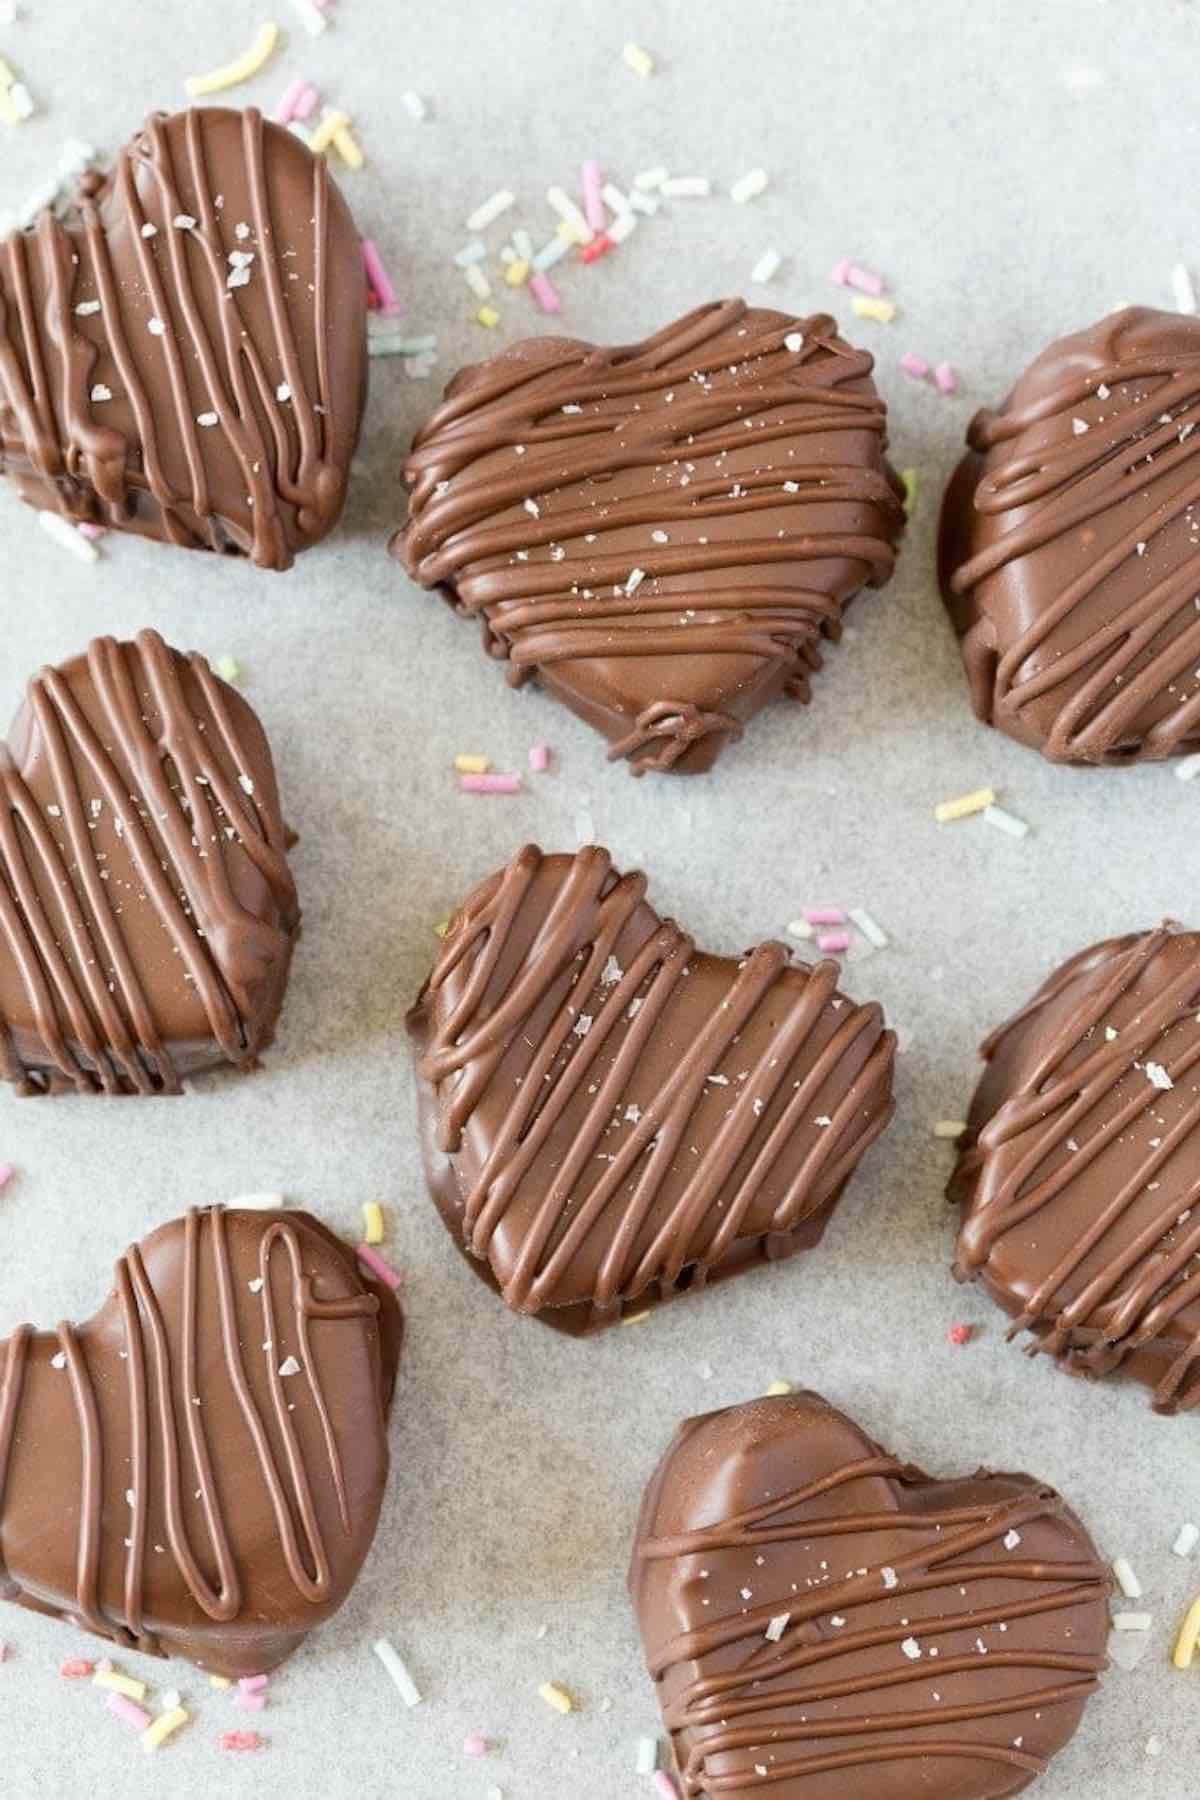 Reese's hearts.